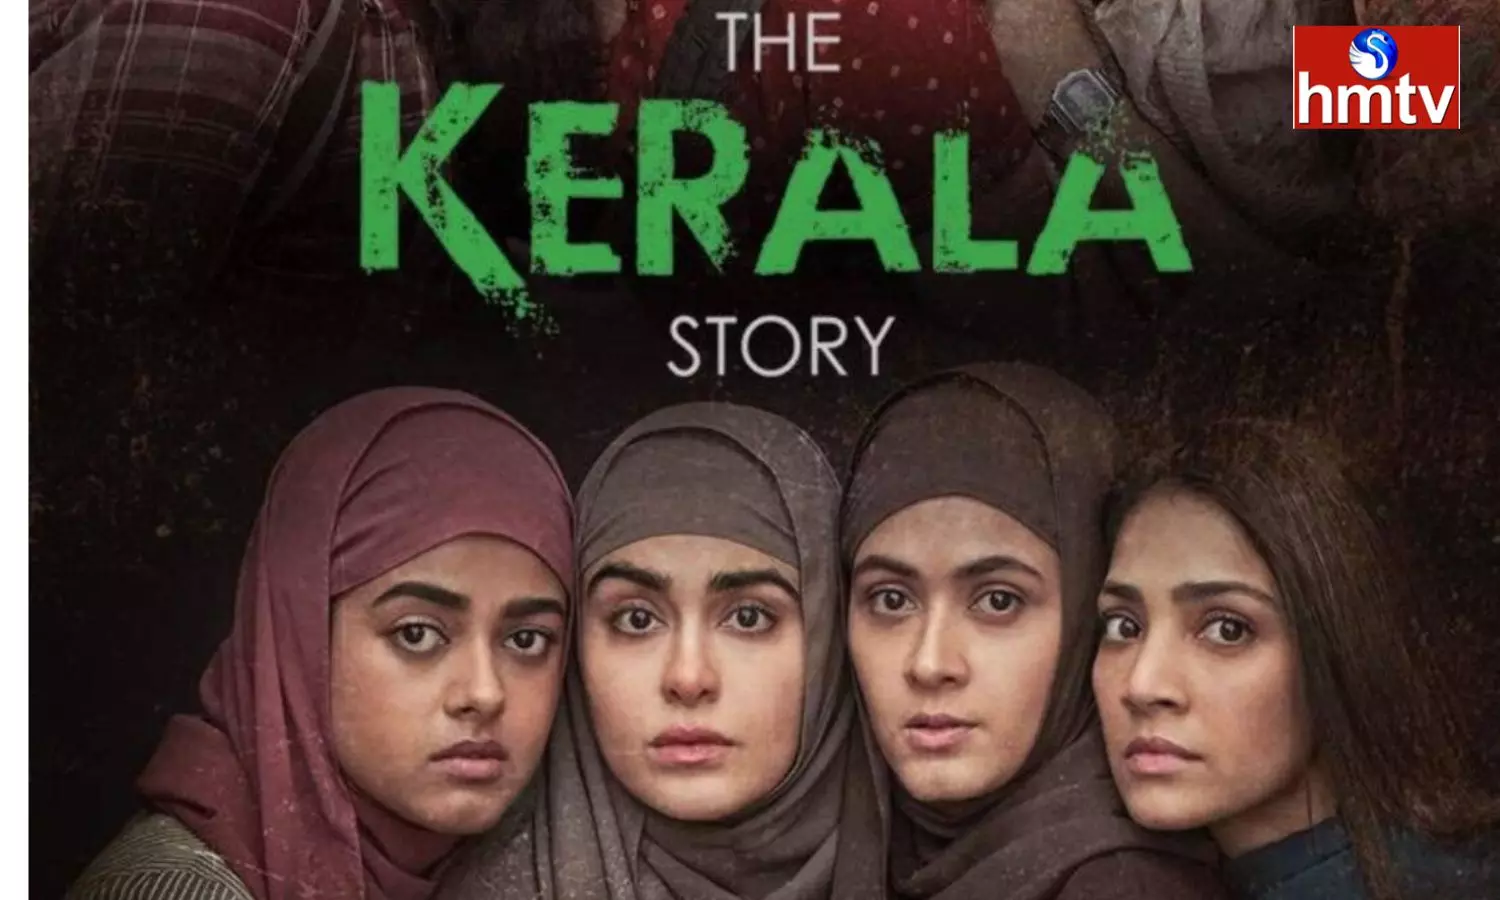 The Kerala Story Shows Canceled in Tamil Nadu